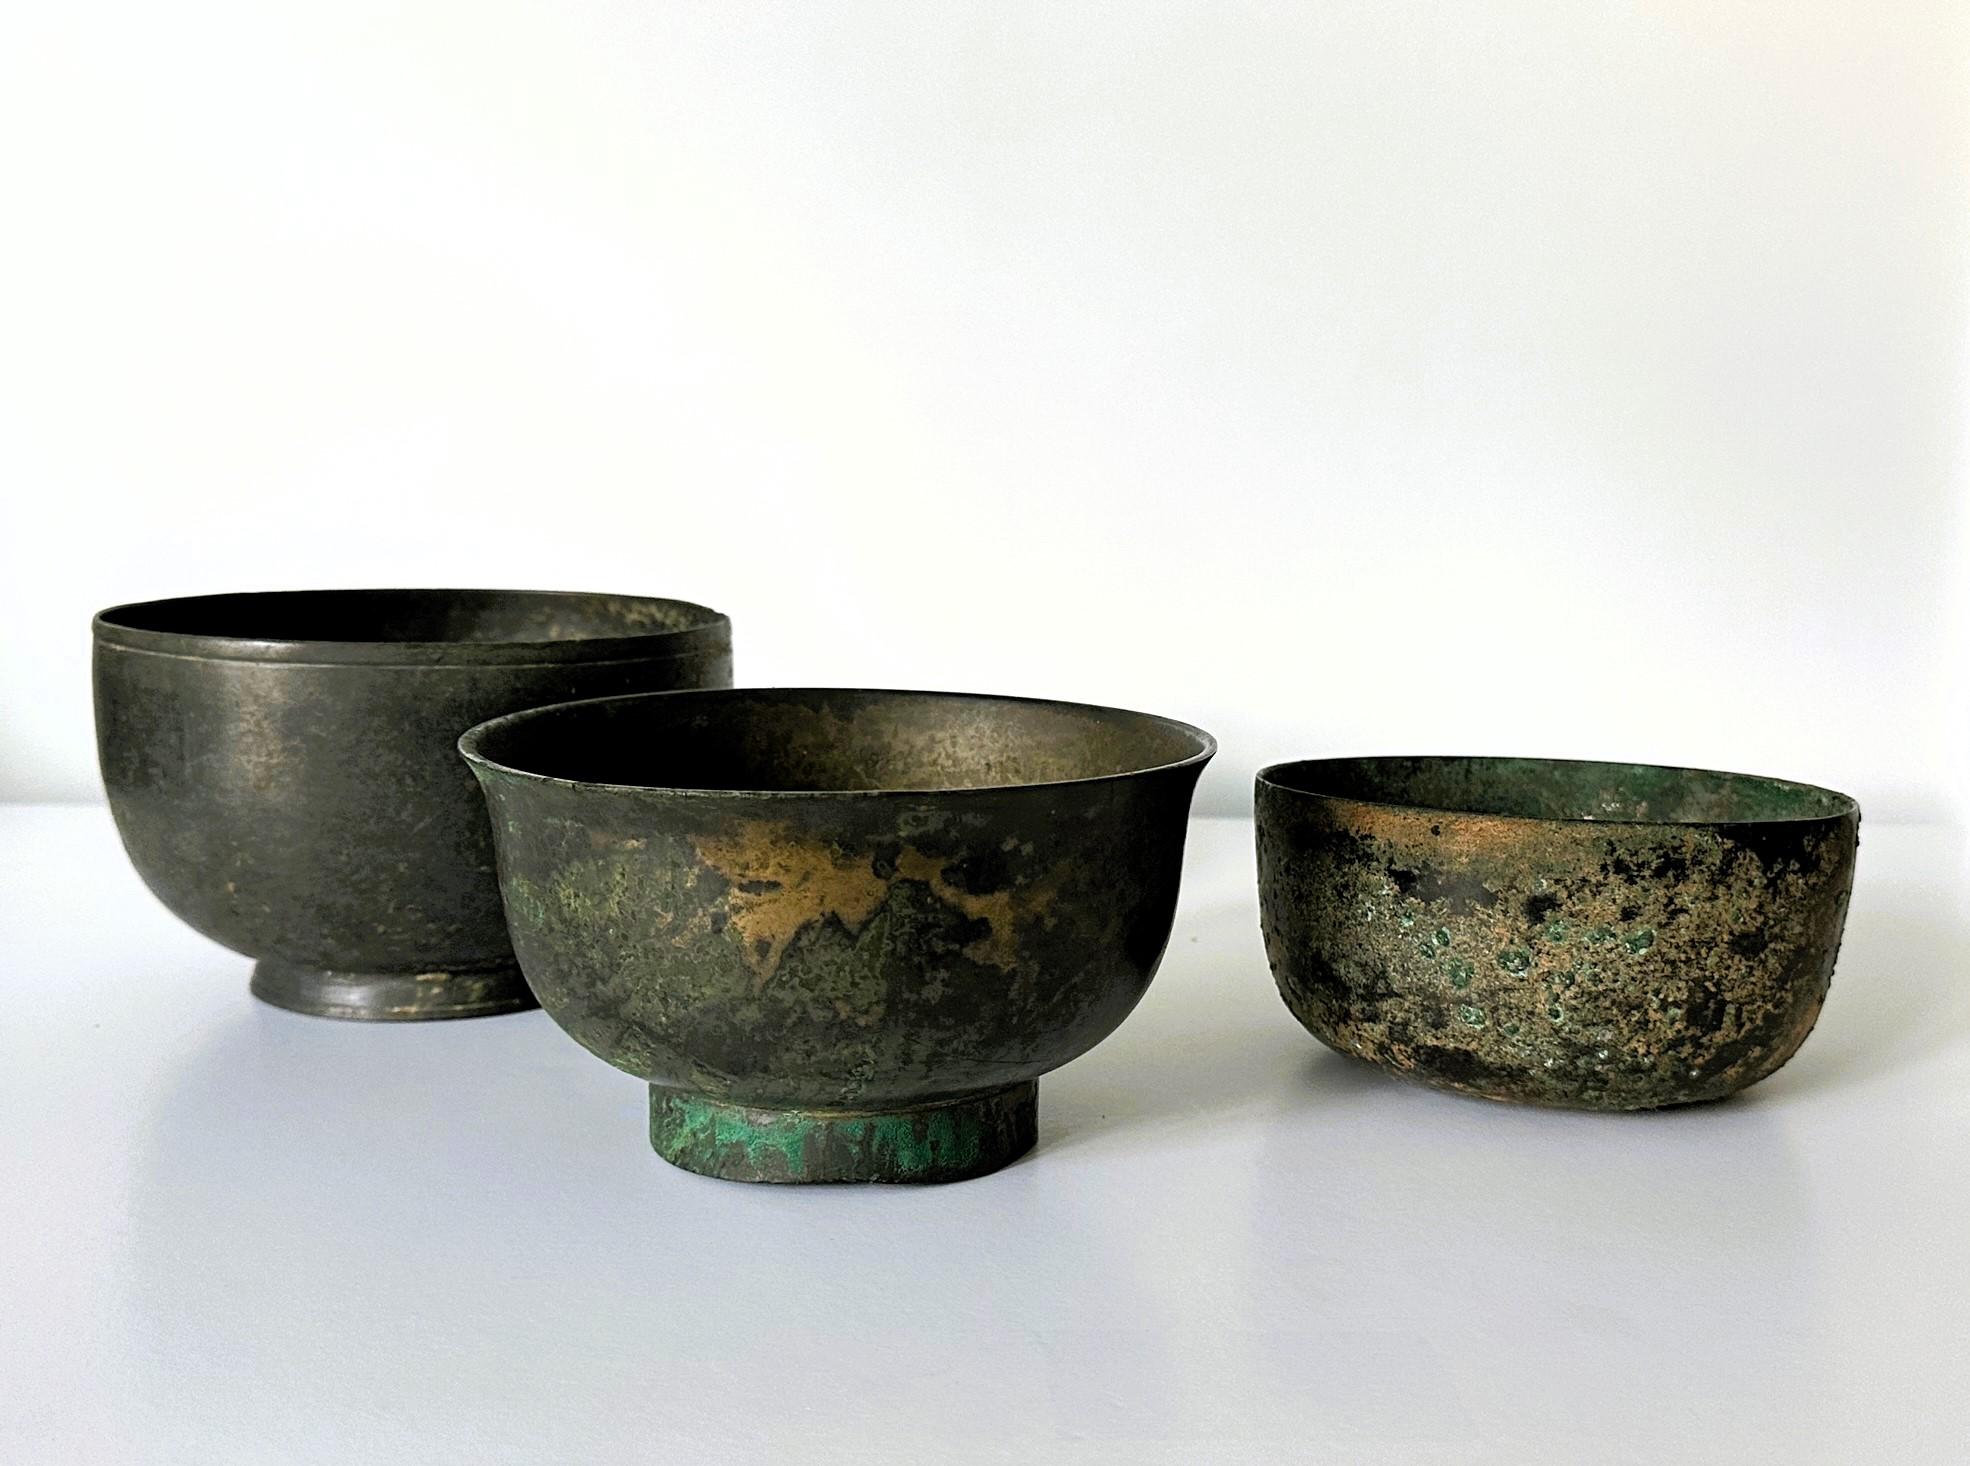 A collection of three bronze bowls from Korean dated to 14-17th century (late Goryeo to early Joseon Dynasty). It consists of an early example with a slight curvy wall and a high foot ring wiht fasten pins. The prototype is dated to 13-14th century